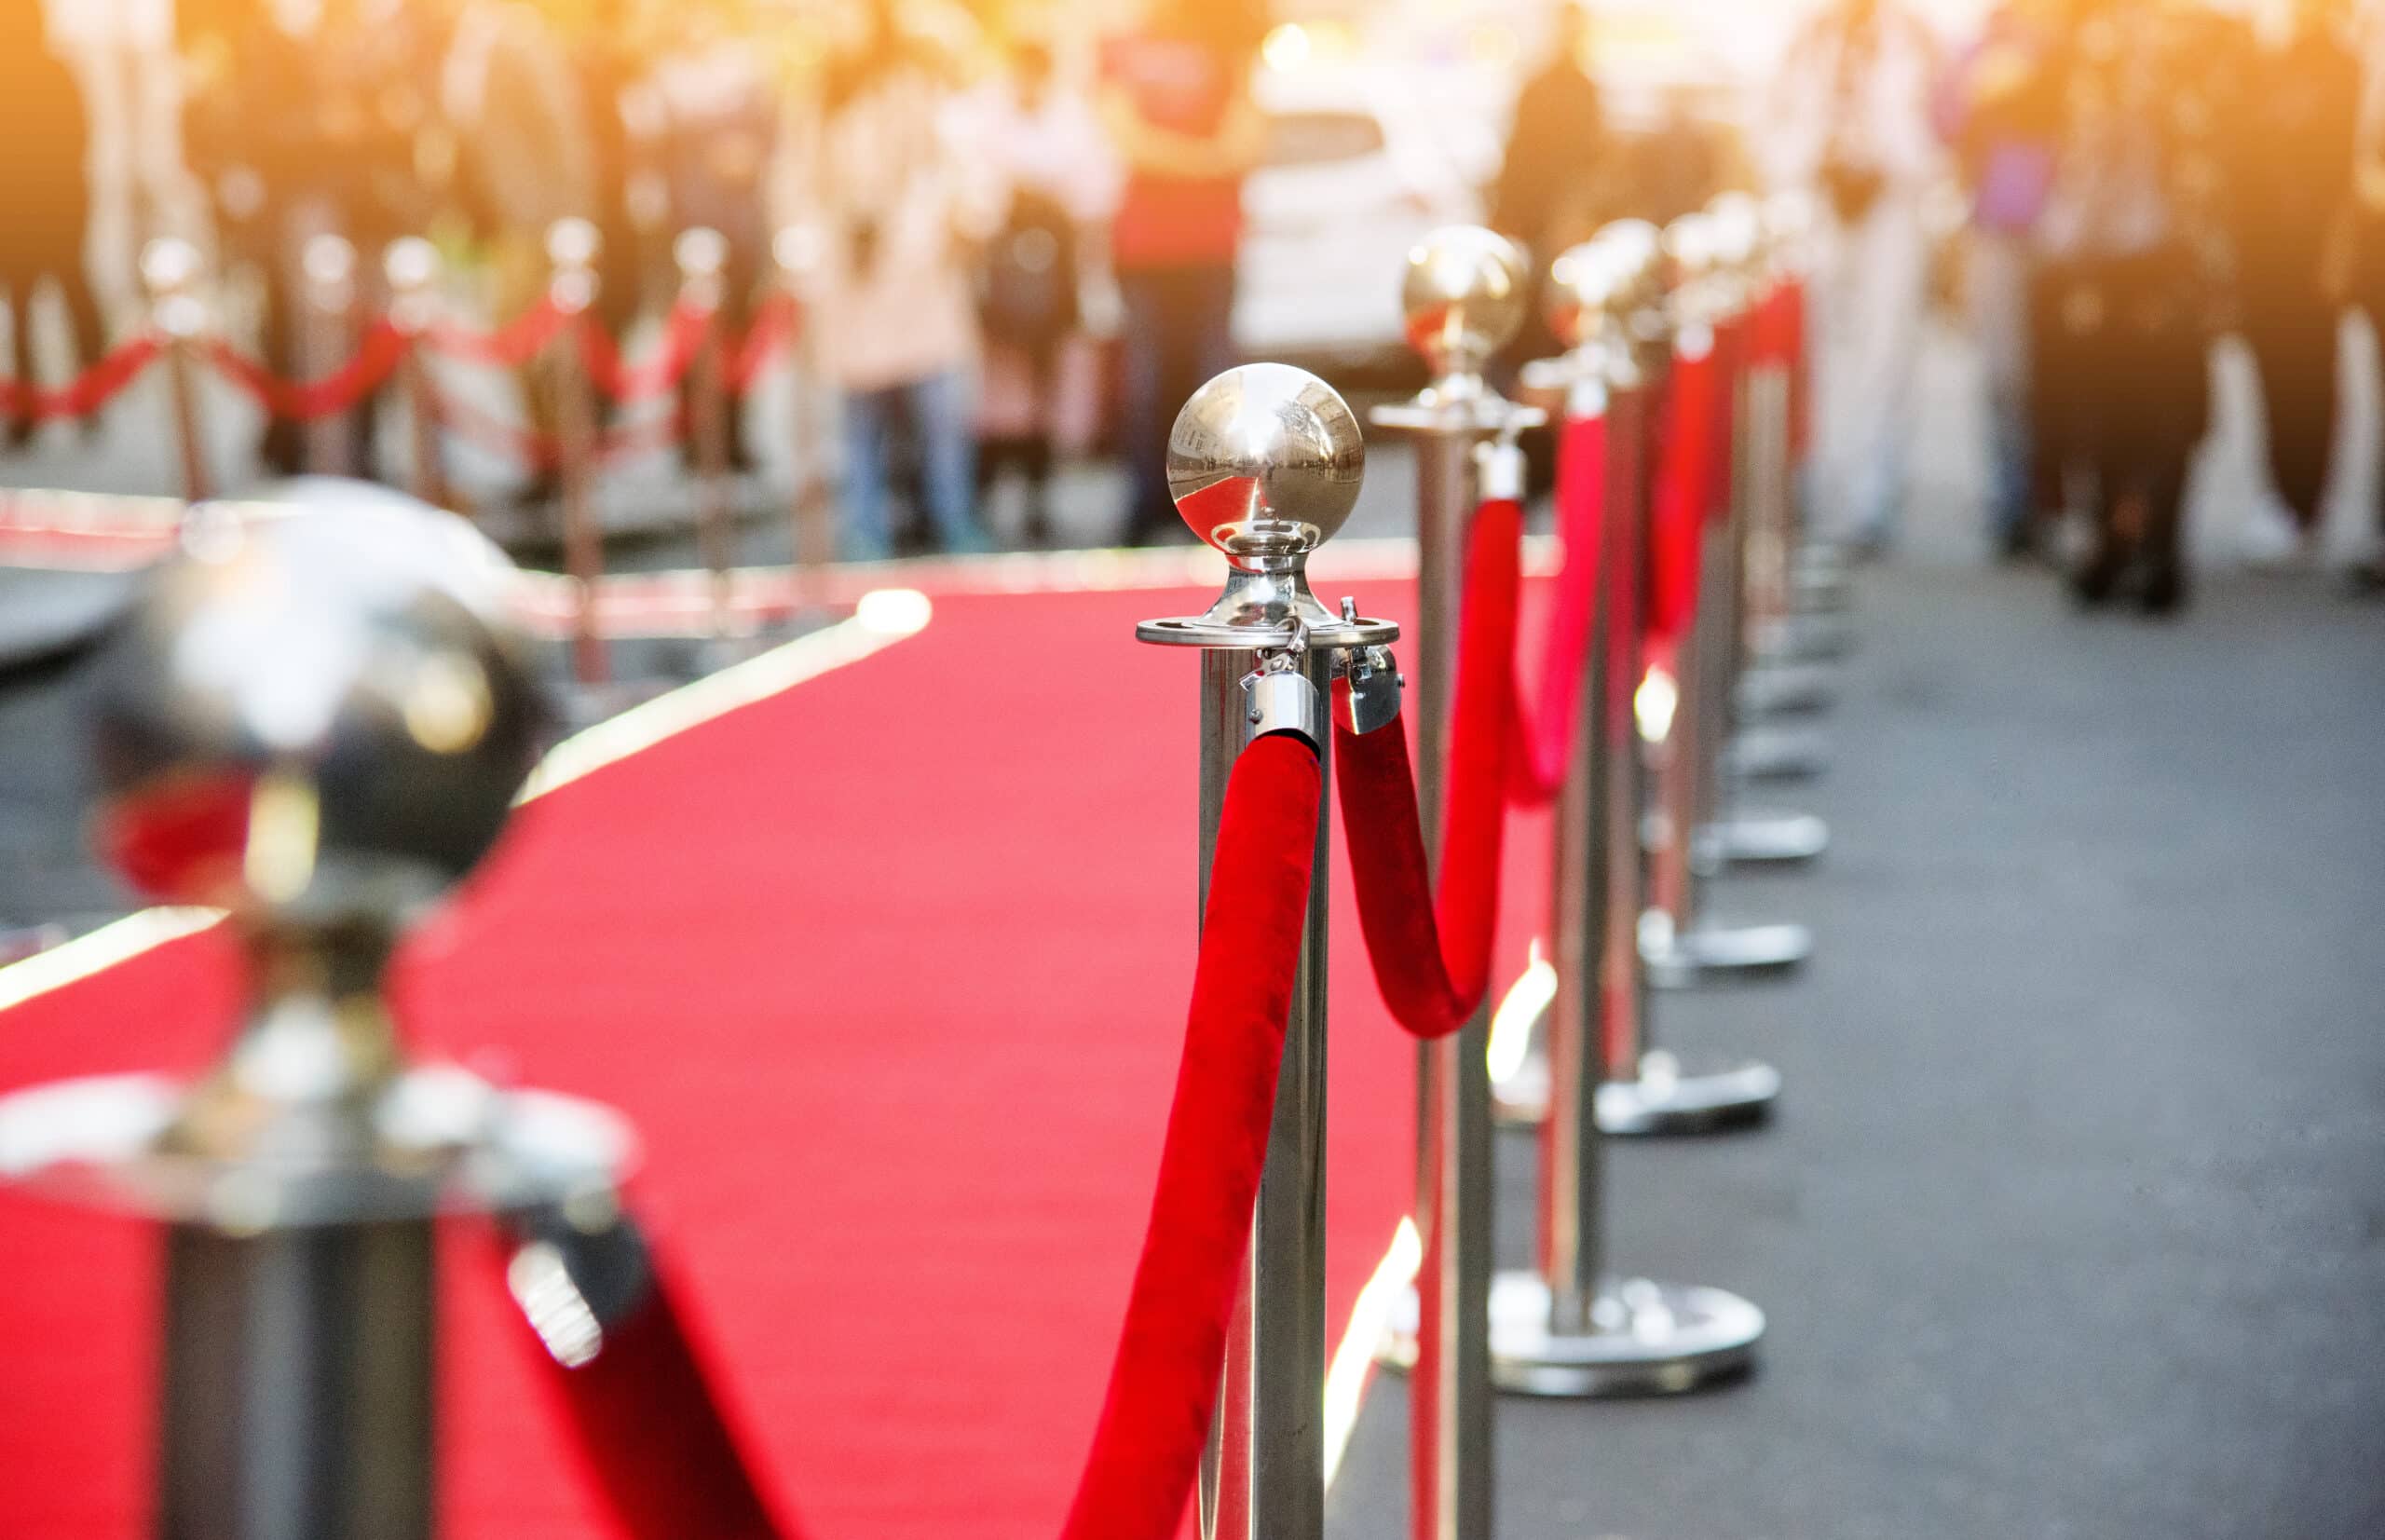 Red velvet ropes lining the entrance of a VIP event, with Global Risk Solutions providing premiere security services in Santa Monica.